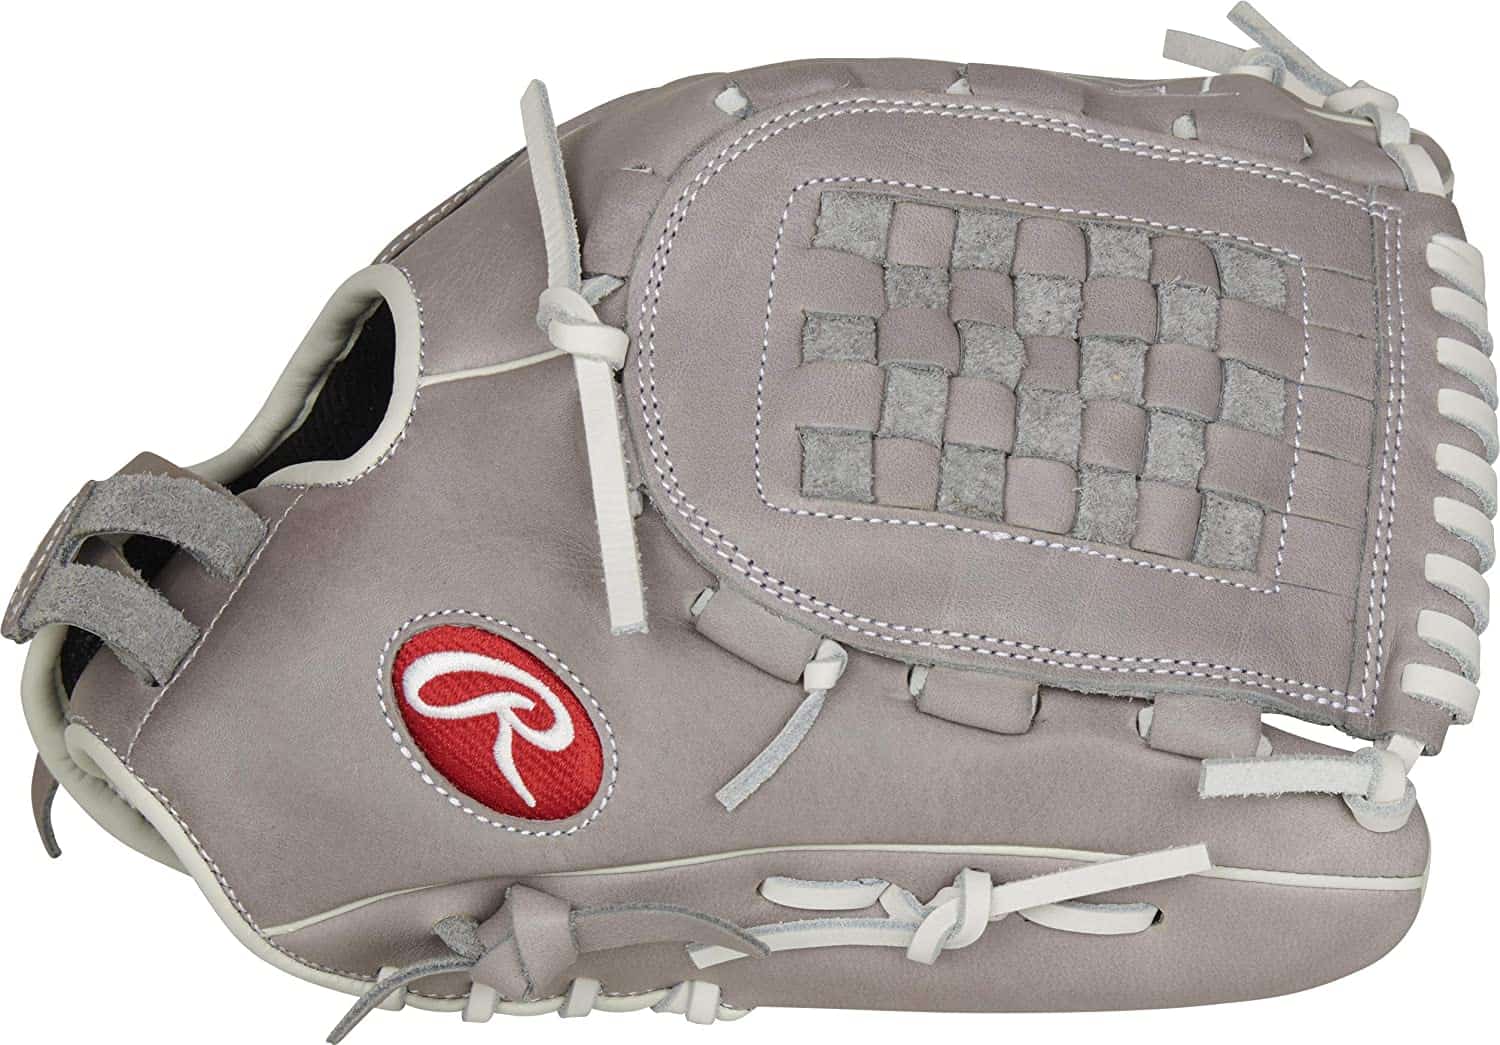 7 Best Fastpitch Softball Glove Of 2022(Tested and Reviewed) |